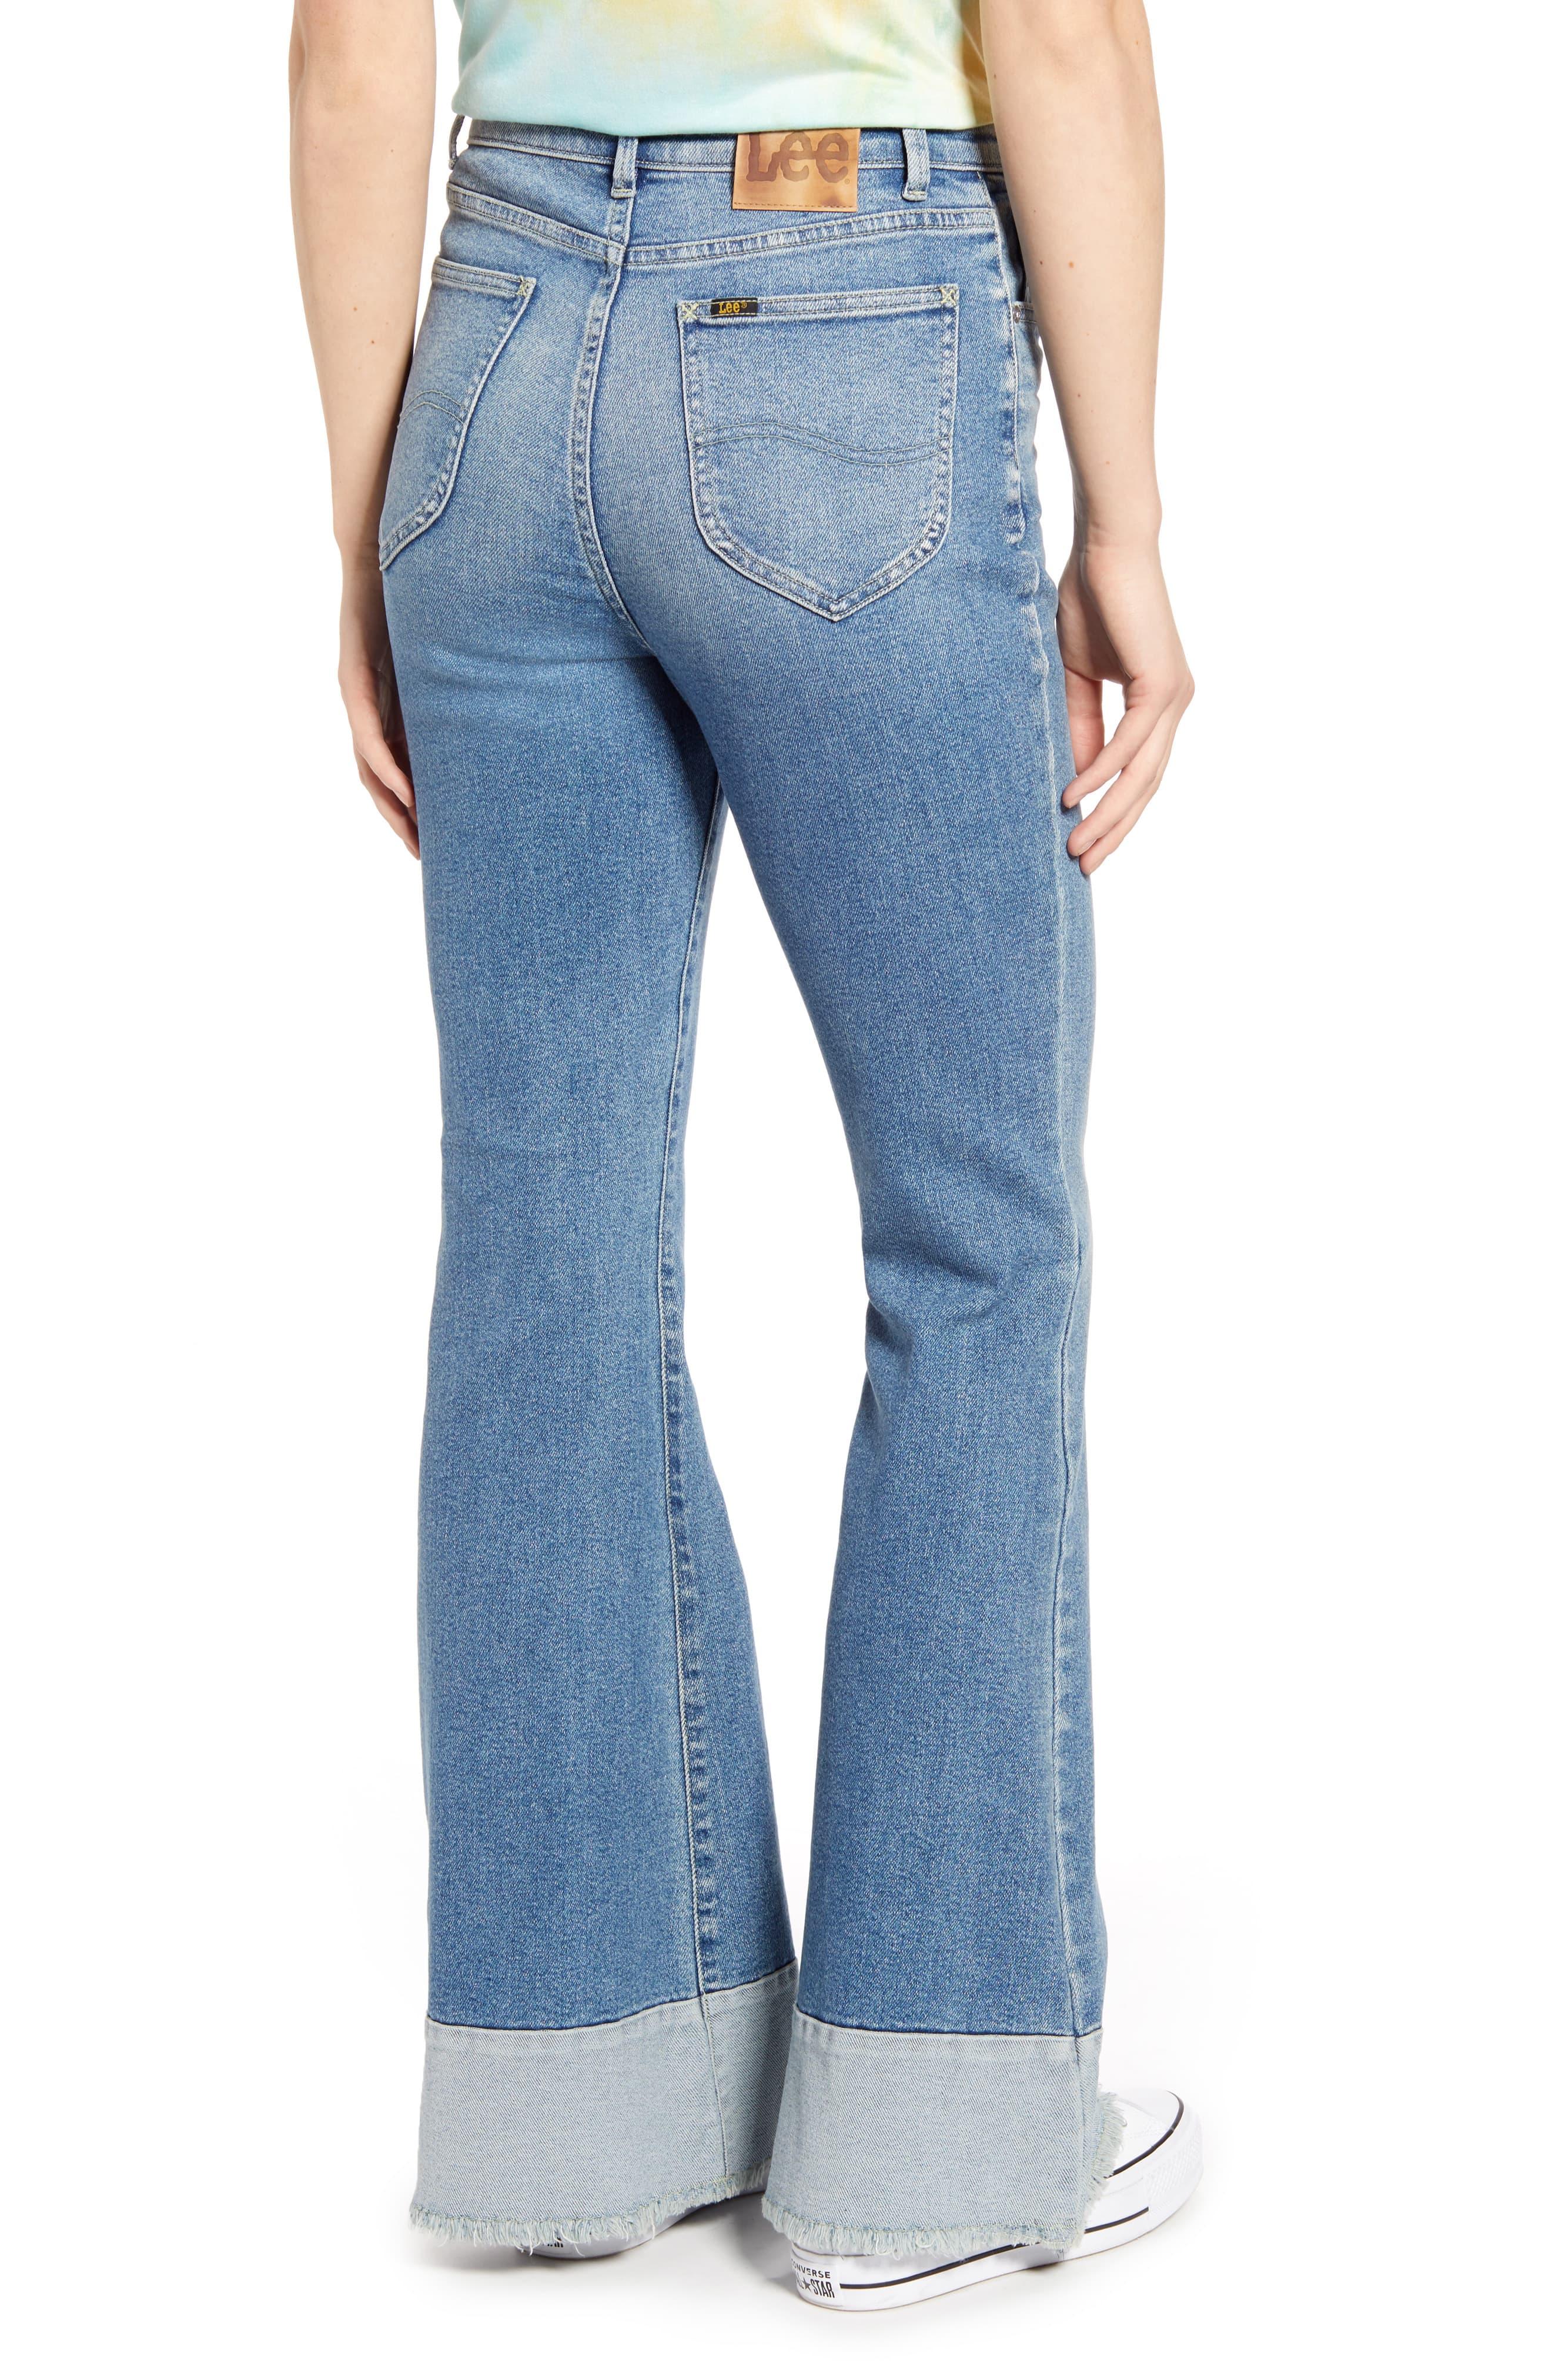 Lee Jeans Denim High Waist Flare Jeans in Blue - Lyst